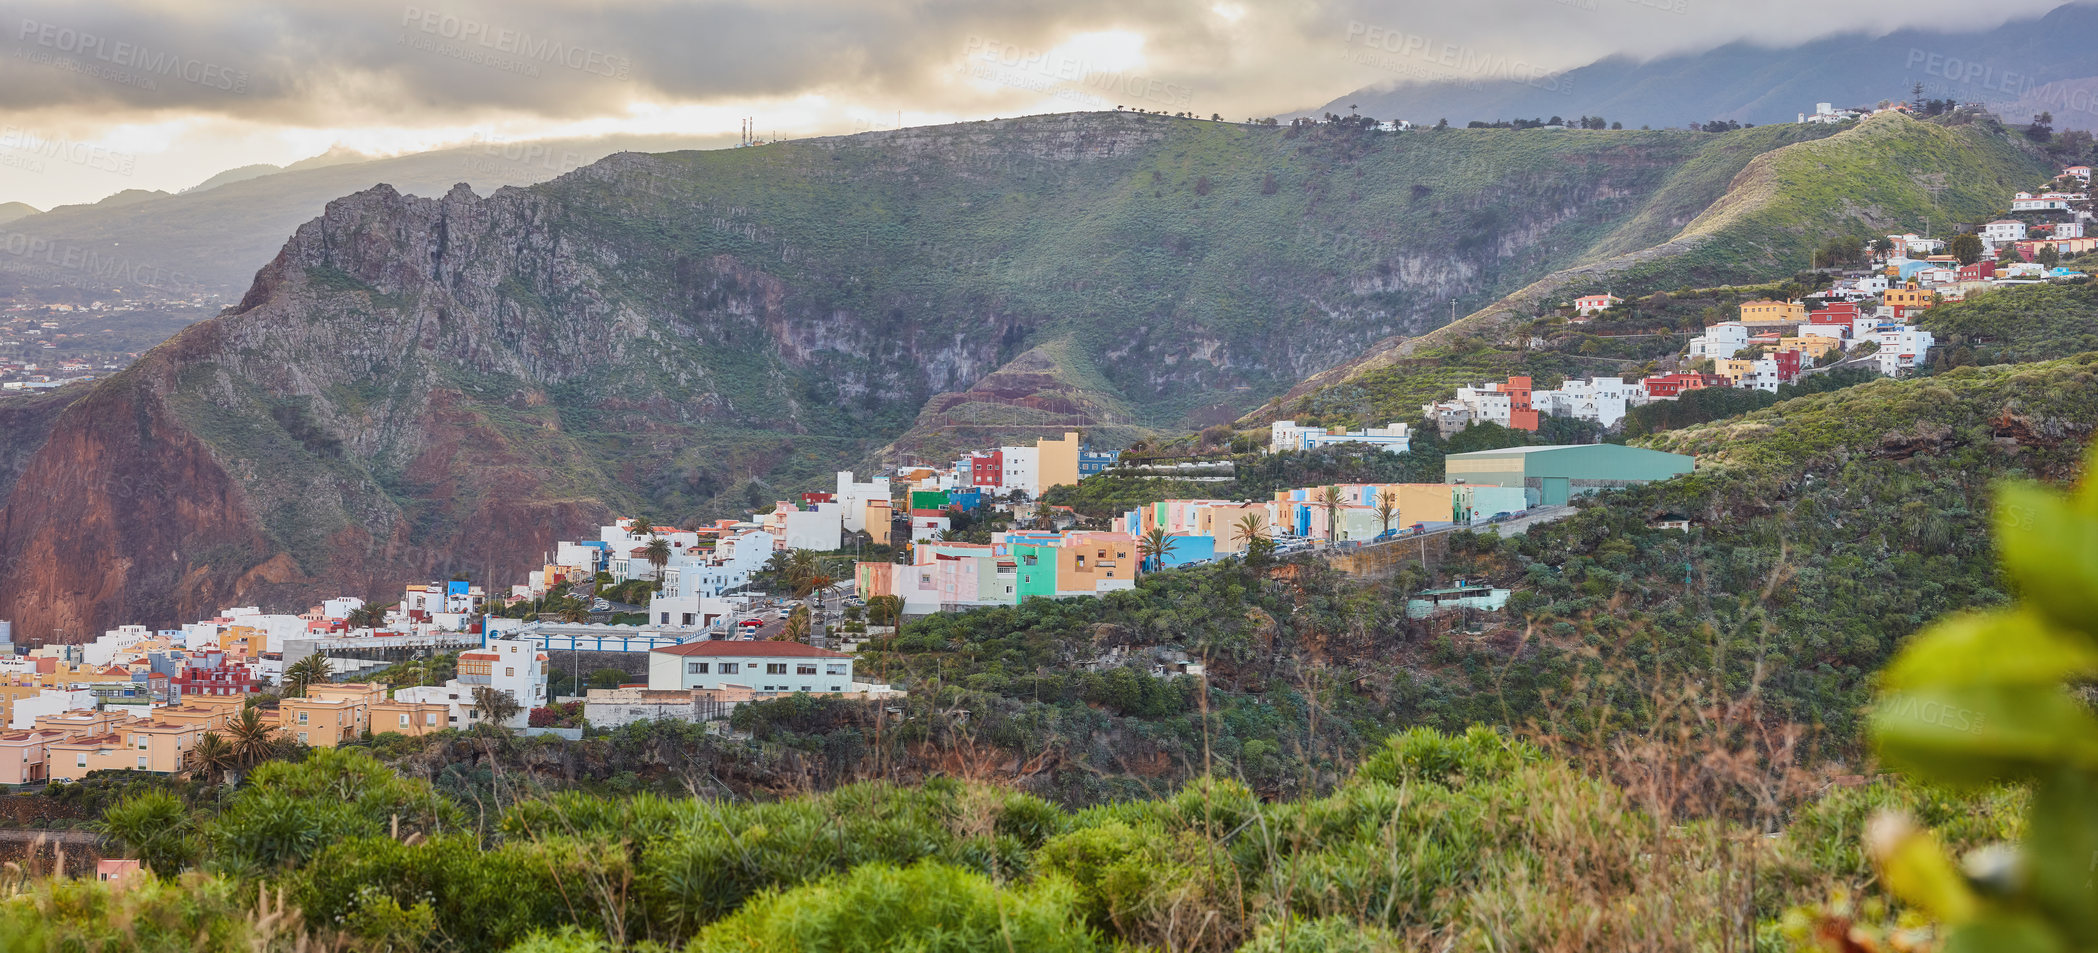 Buy stock photo Colorful buildings in Santa Cruz, La Palma, Canary Islands with copy space. Beautiful cityscape with bright colors and mountains. A vibrant holiday, vacation and getaway destination on the hillside 